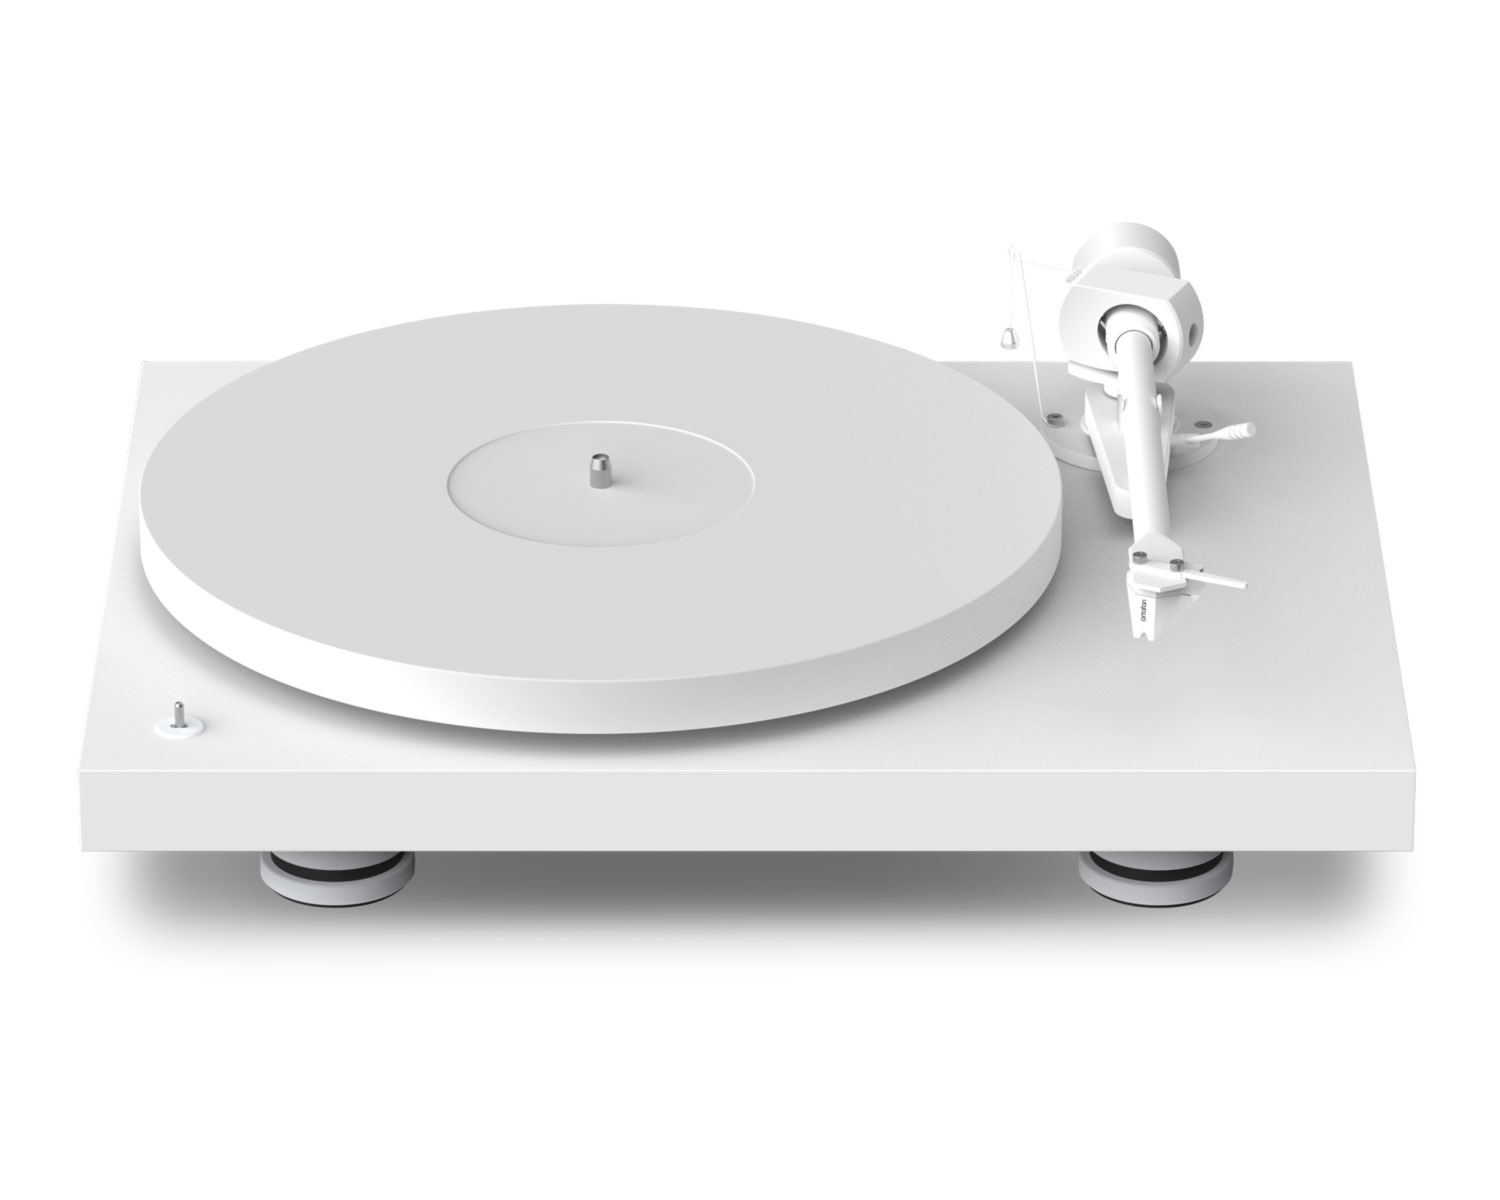 Pro-Ject Debut PRO pladespiller